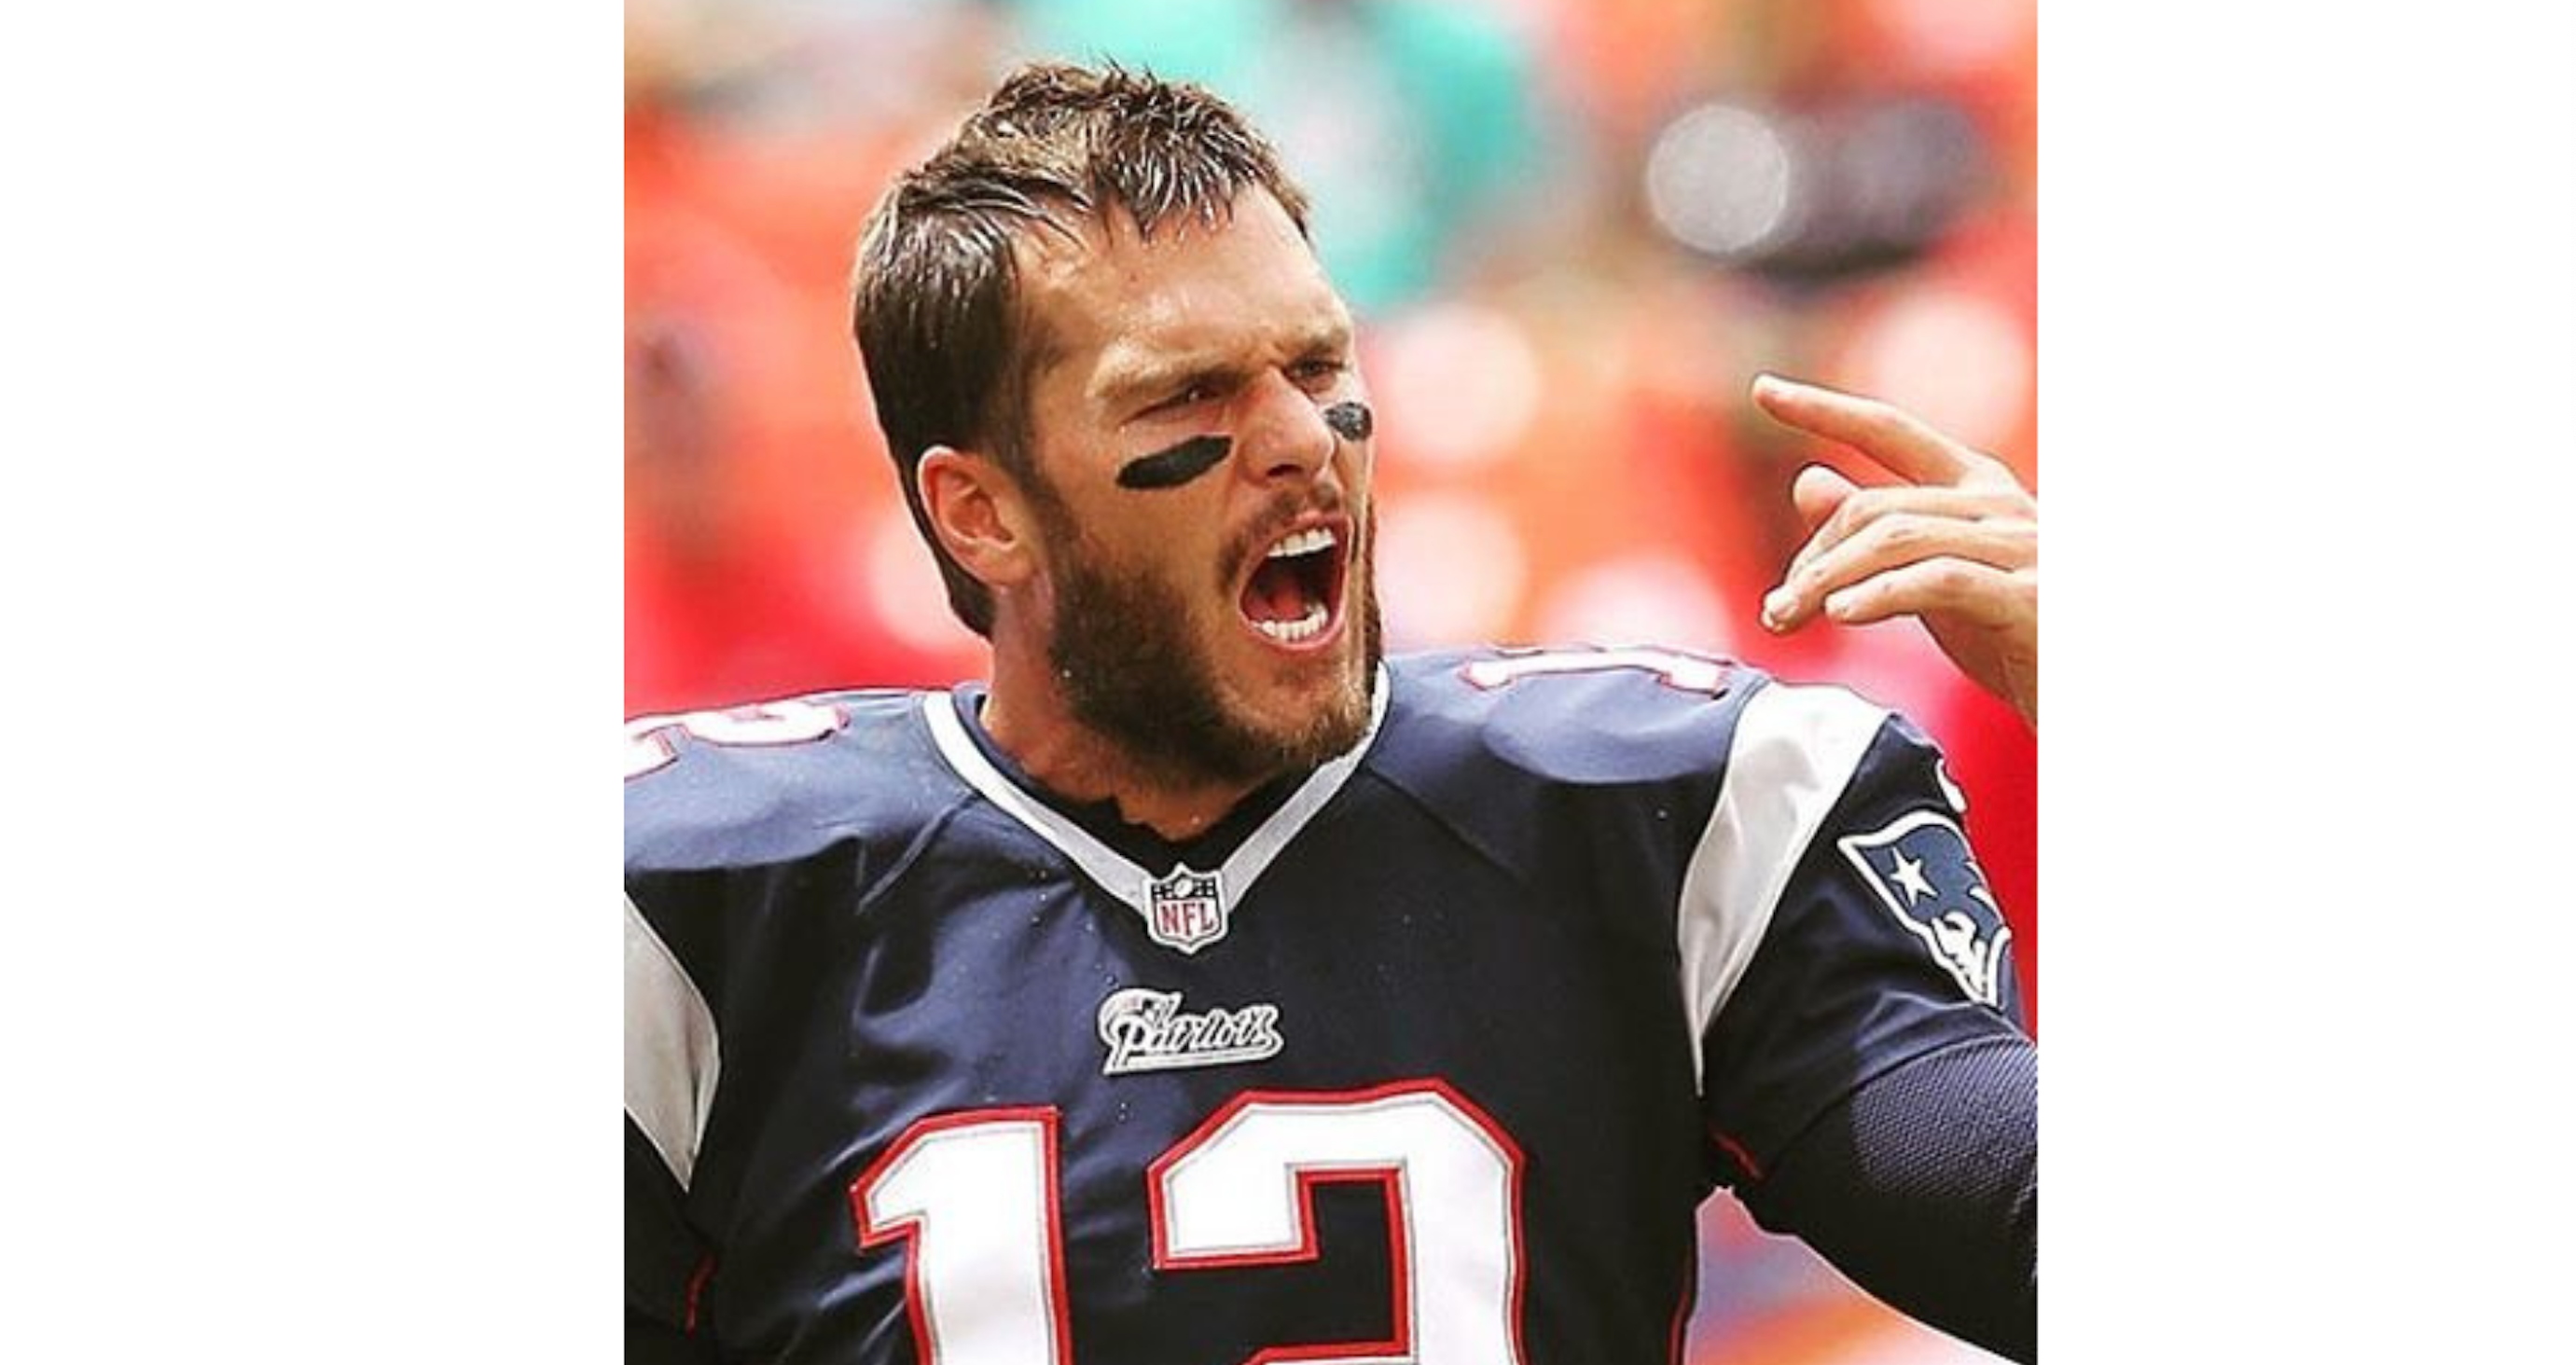 23 Things That Didn't Exist When Tom Brady Entered The NFL: Tesla, Bitcoin, iPhones, Social Media And More